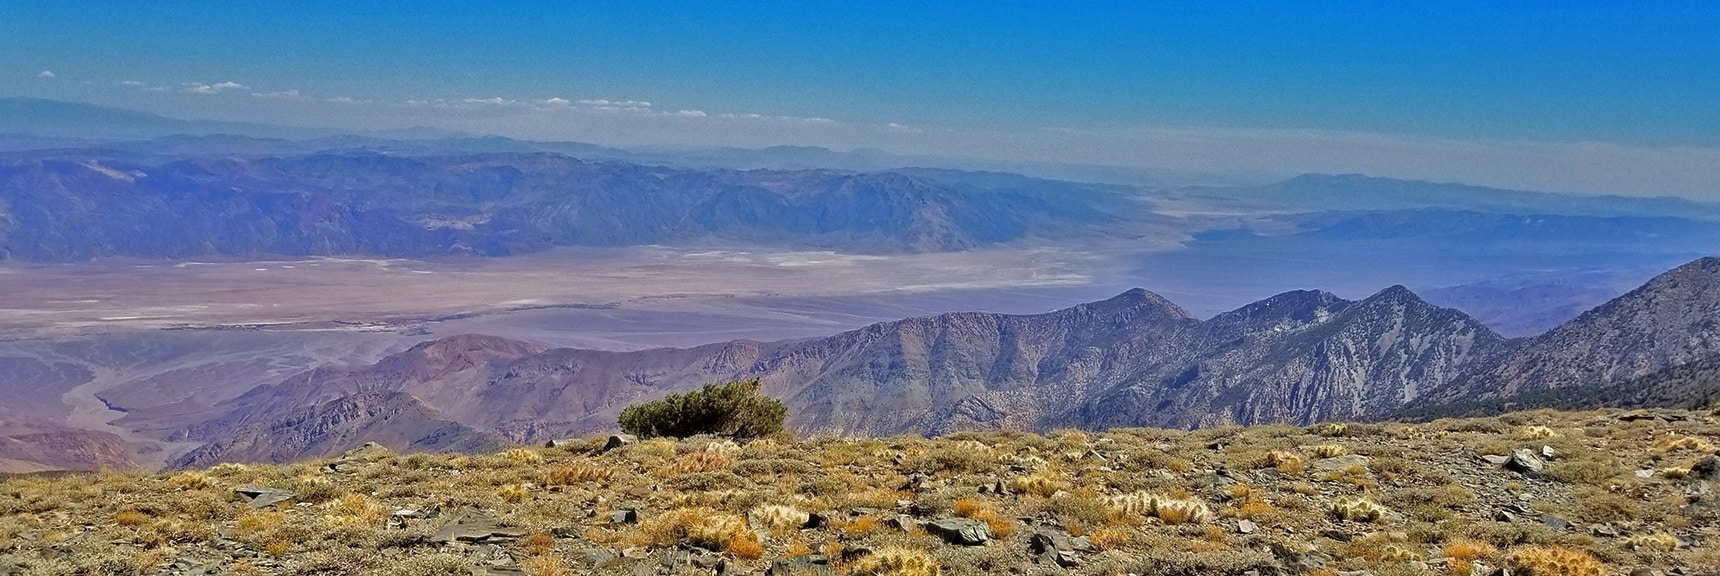 Southern Death Valley Stretches Out Below Bennett Peak Summit | Telescope Peak Summit from Wildrose Charcoal Kilns Parking Area, Panamint Mountains, Death Valley National Park, California